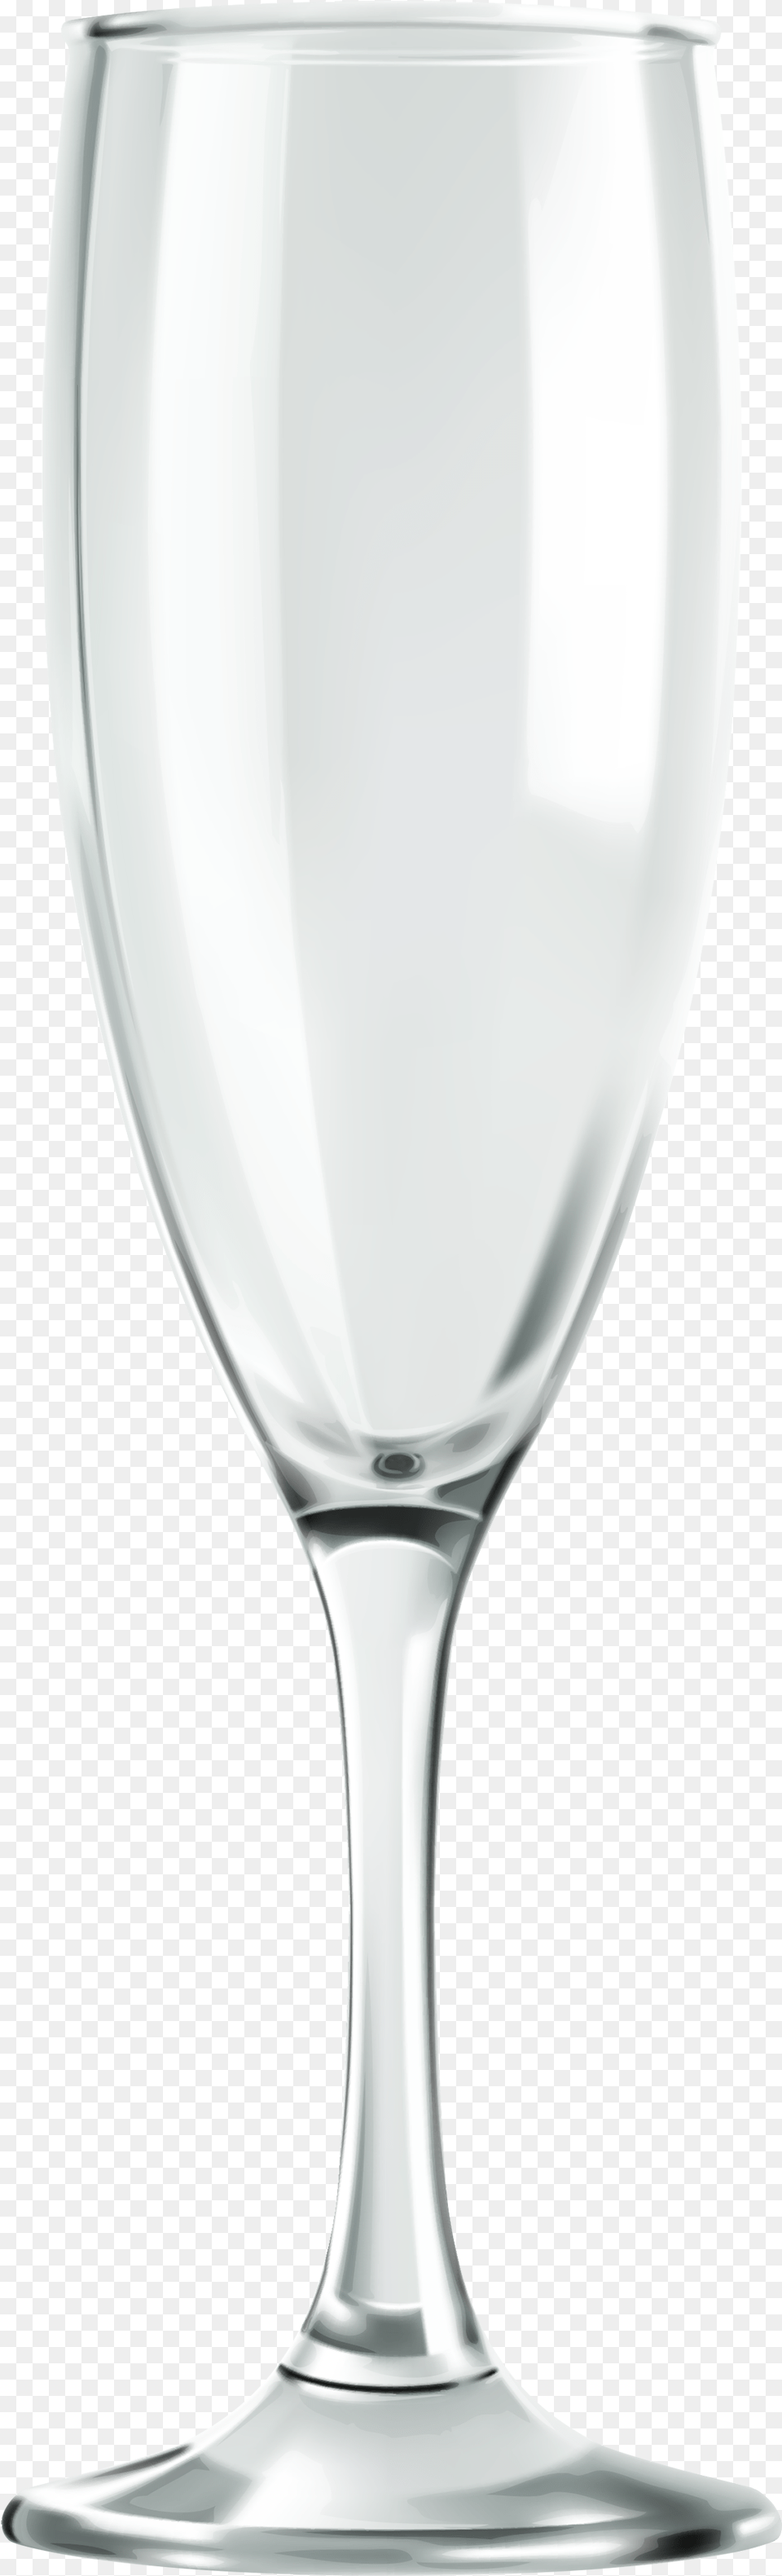 Champagne Glass Clipart Wine Glass, Alcohol, Beverage, Goblet, Liquor Png